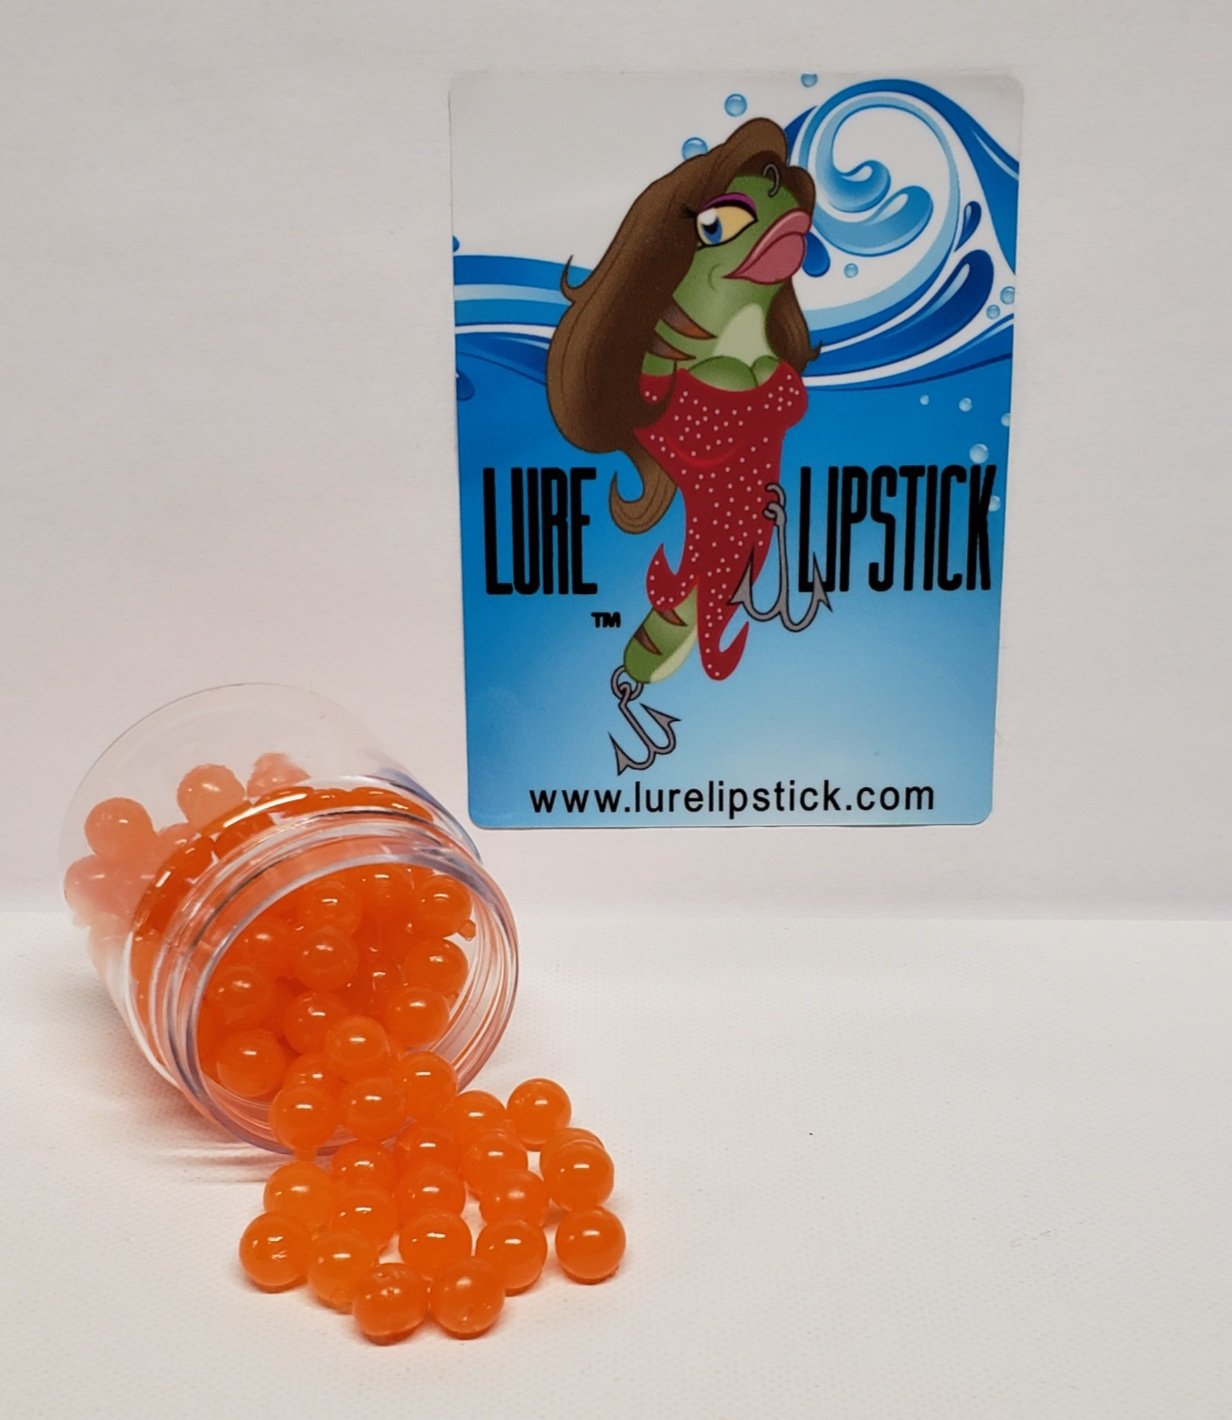 10mm or 8mm Salmon Eggs infused with Anise Oil - 50ct